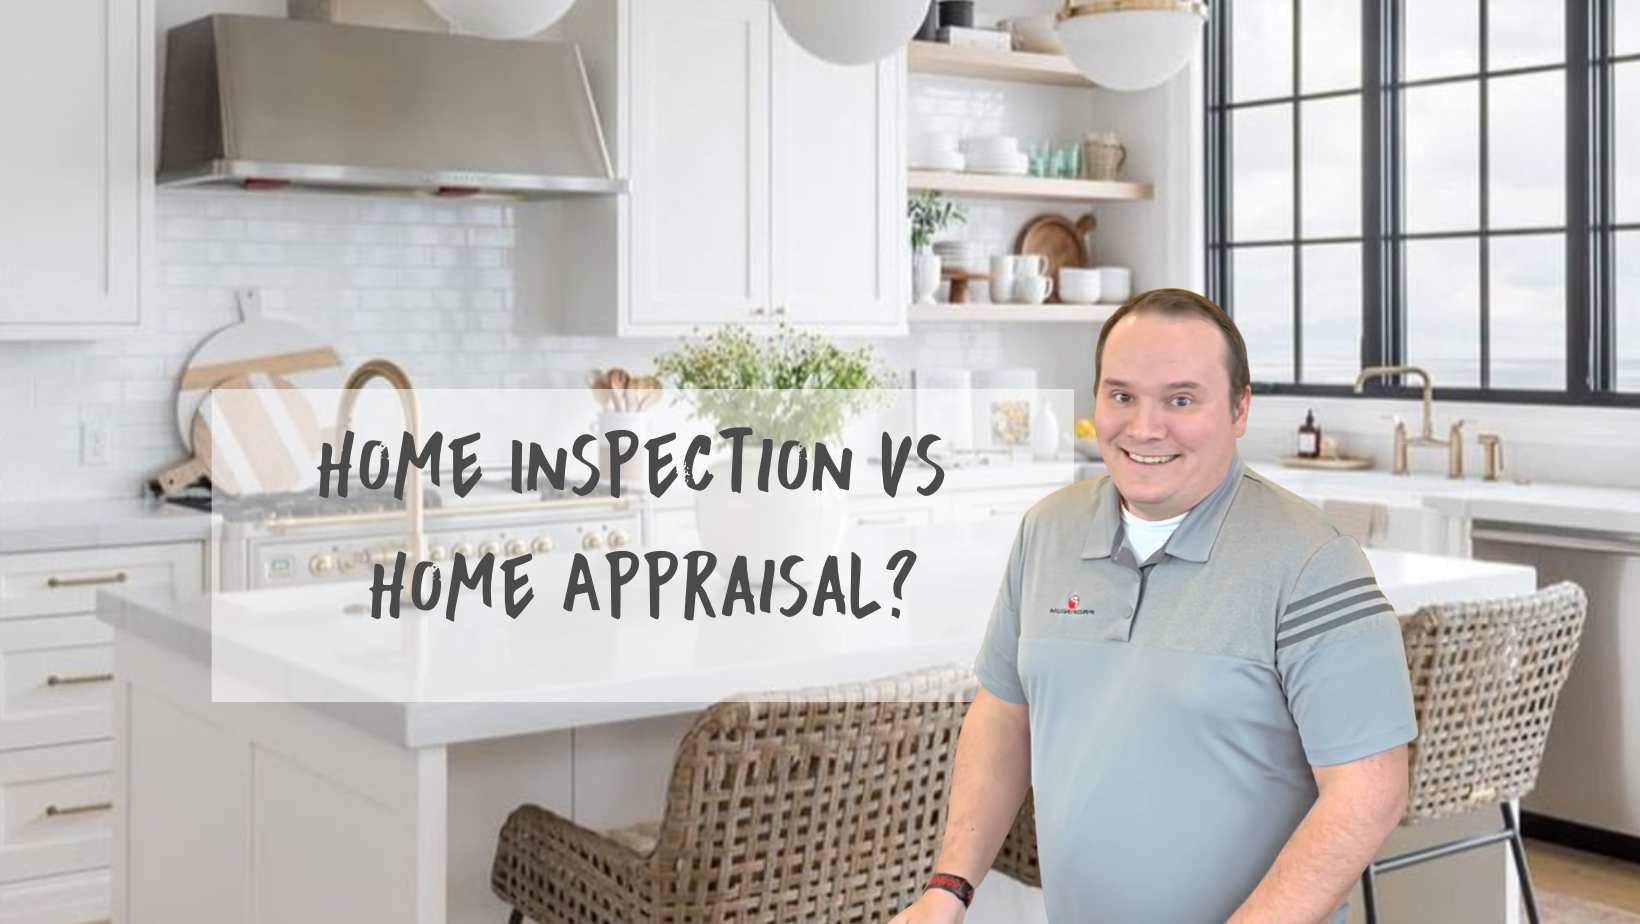 Video Tutorial with Jacob explaining home inspection vs home appraisal